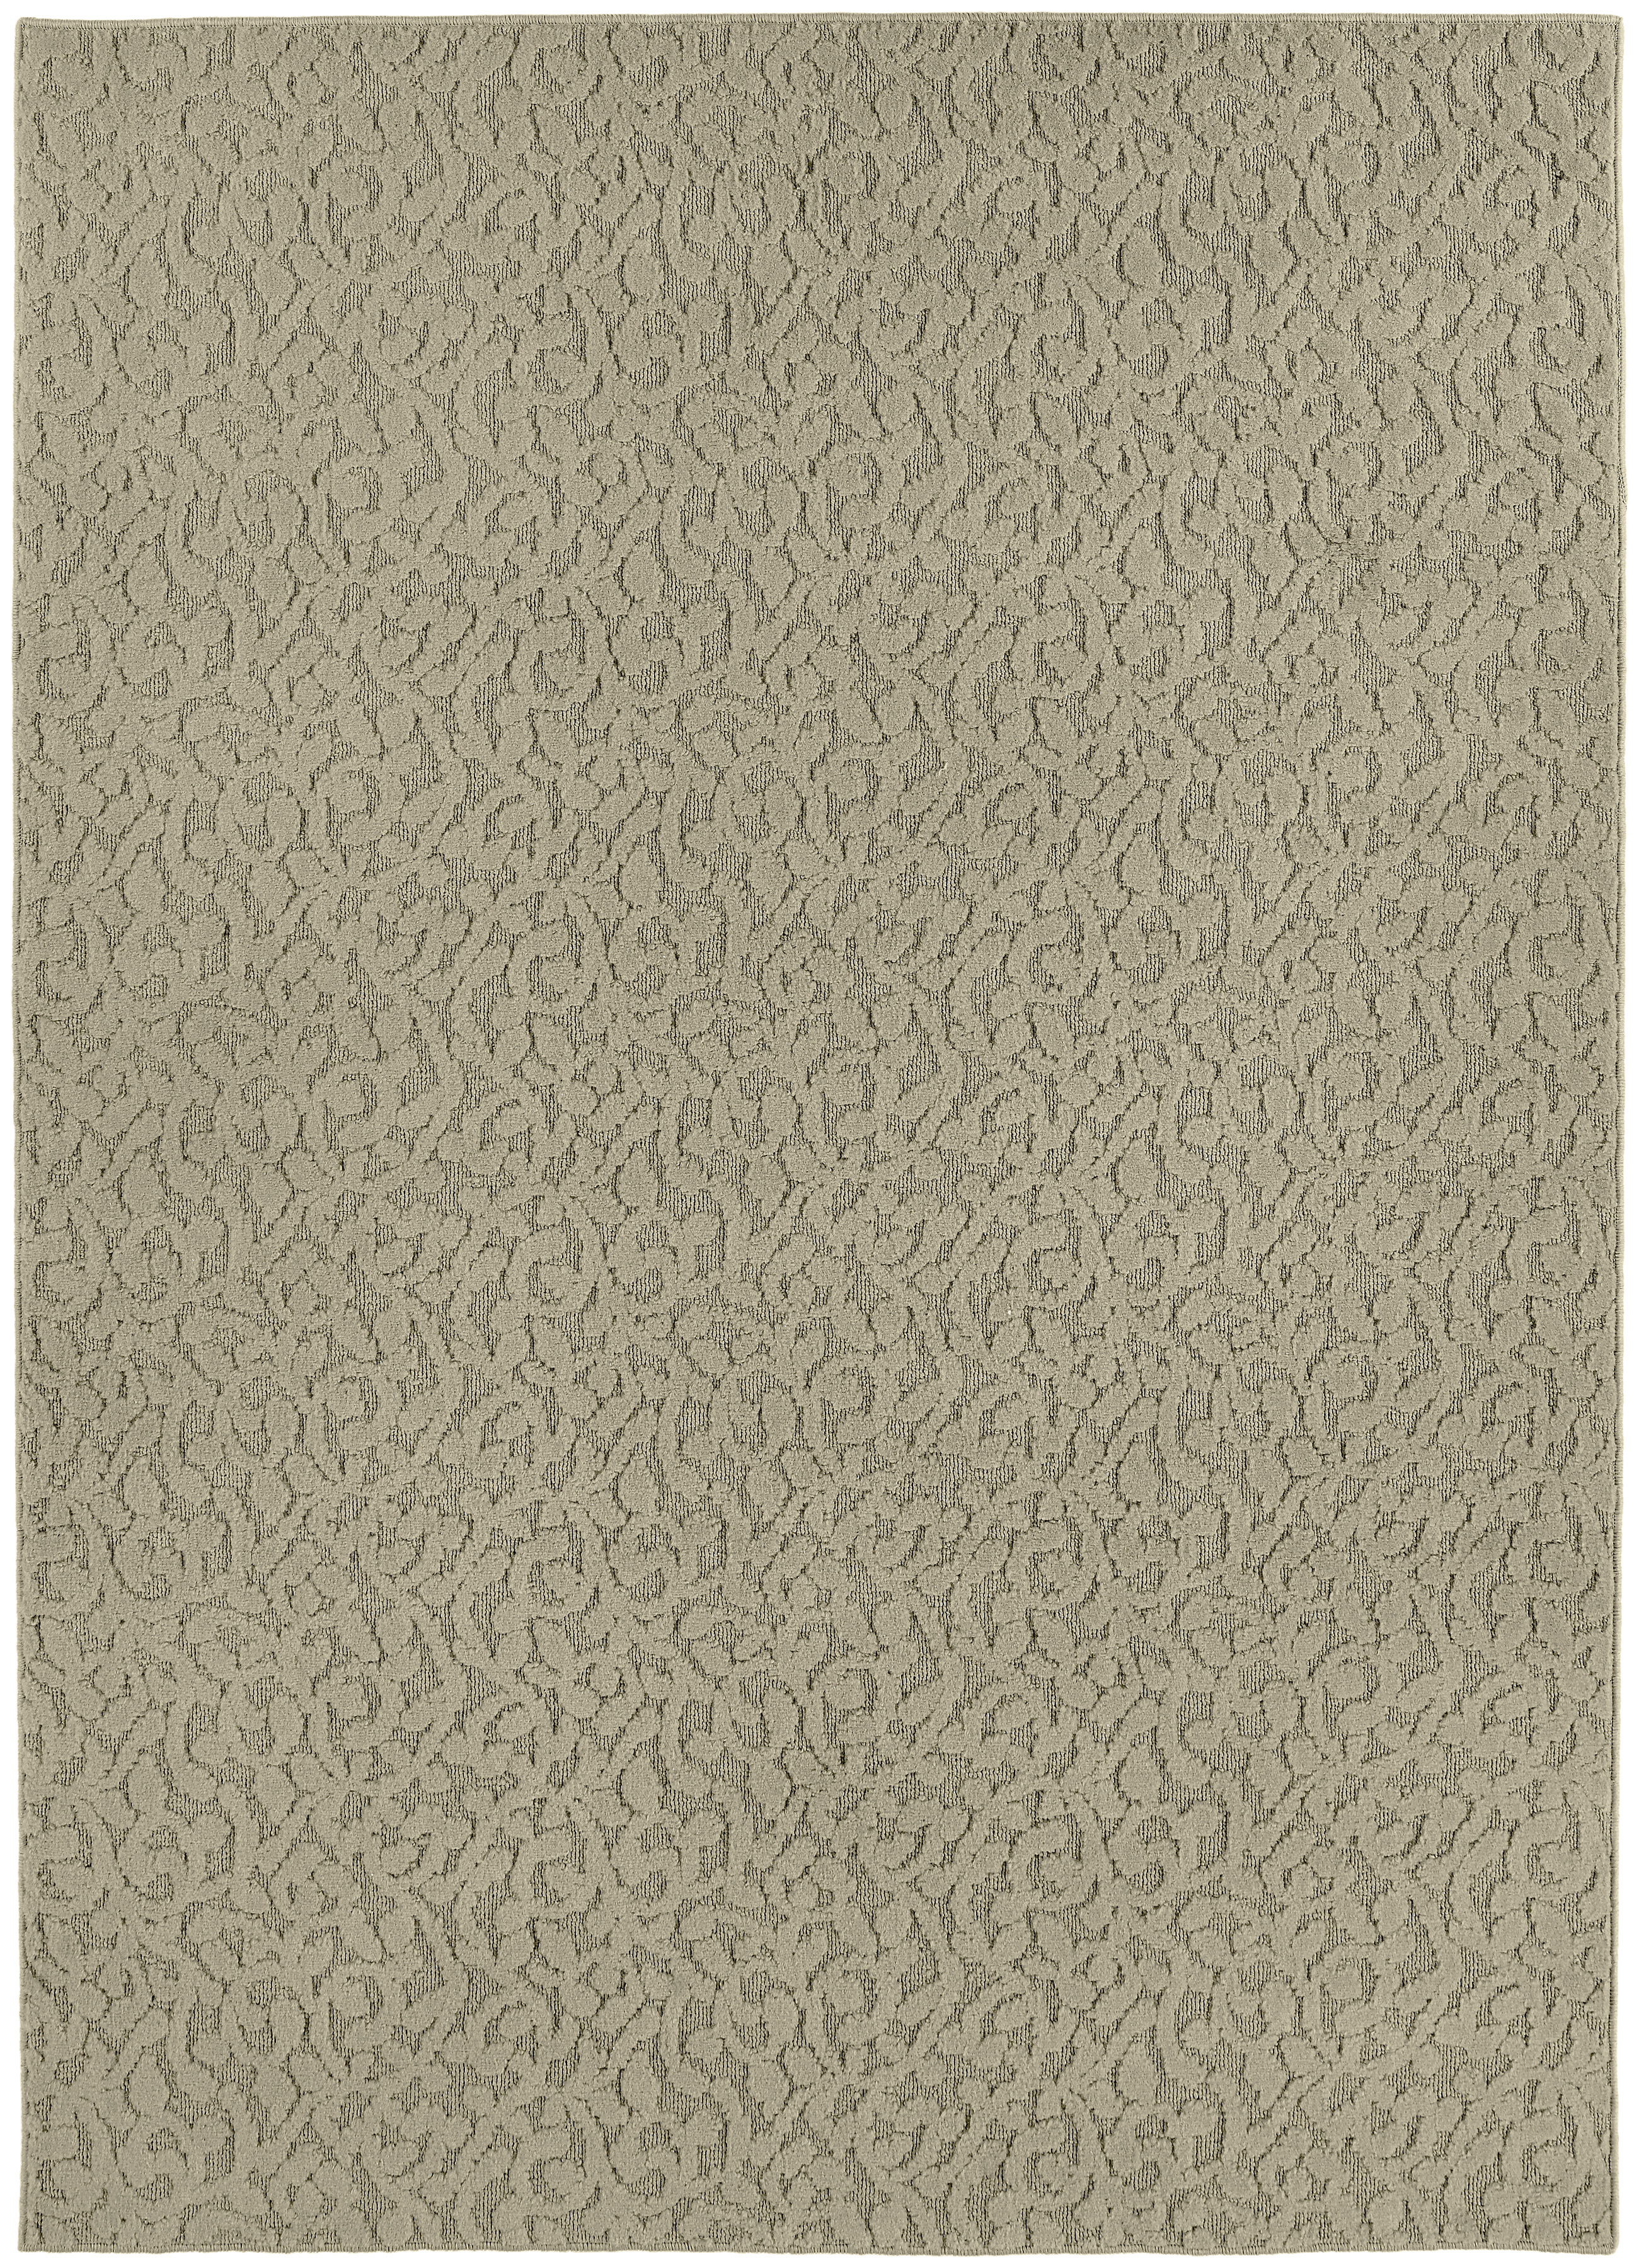 Garland Rugs Ivory Tan 7'6" x 9'6" Floral Indoor Area Rug - image 1 of 5